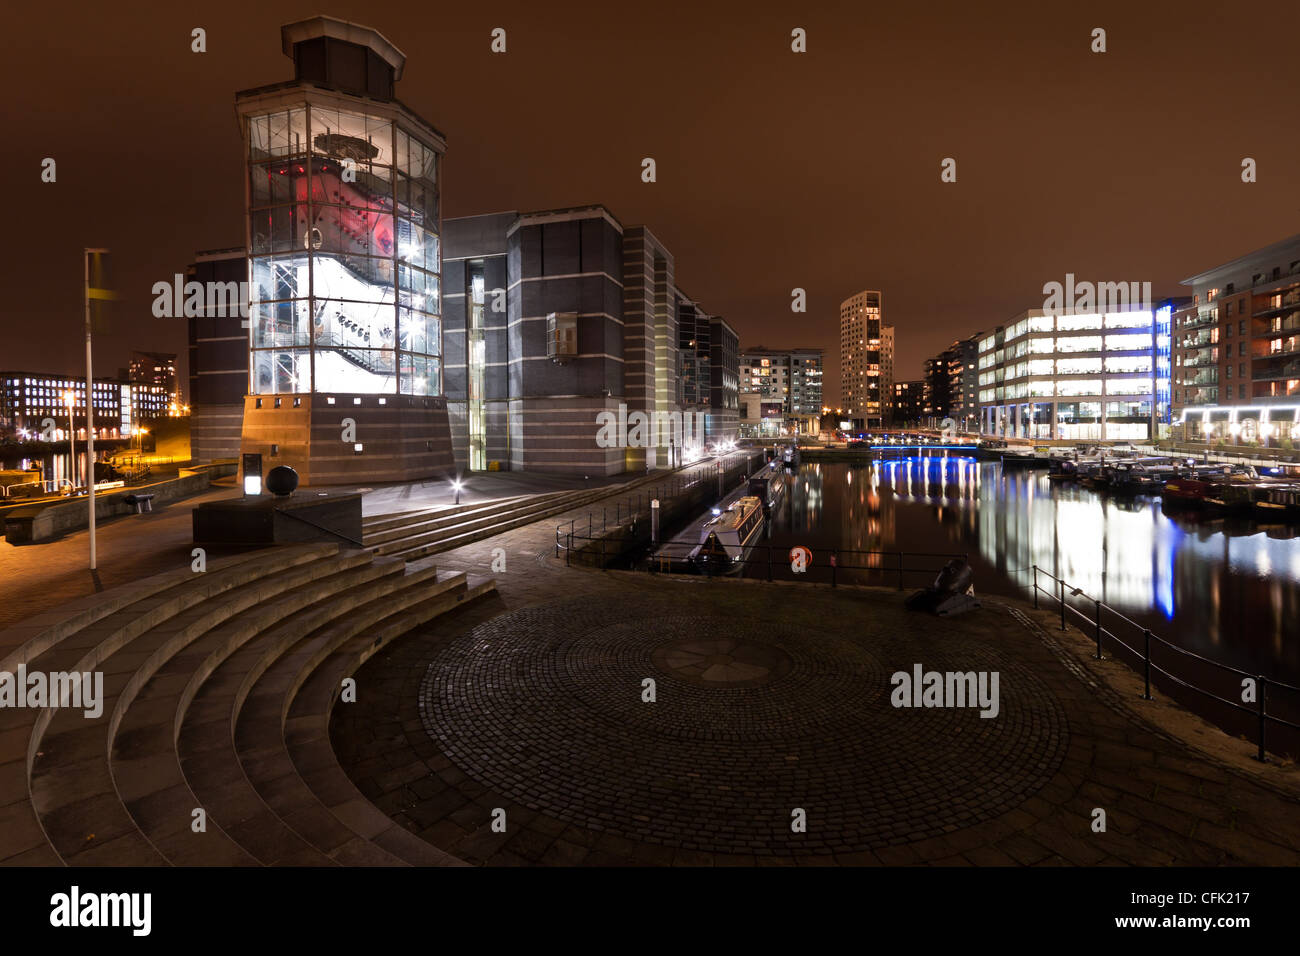 The Royal Armouries after dark, Clarence Dock in Leeds Stock Photo